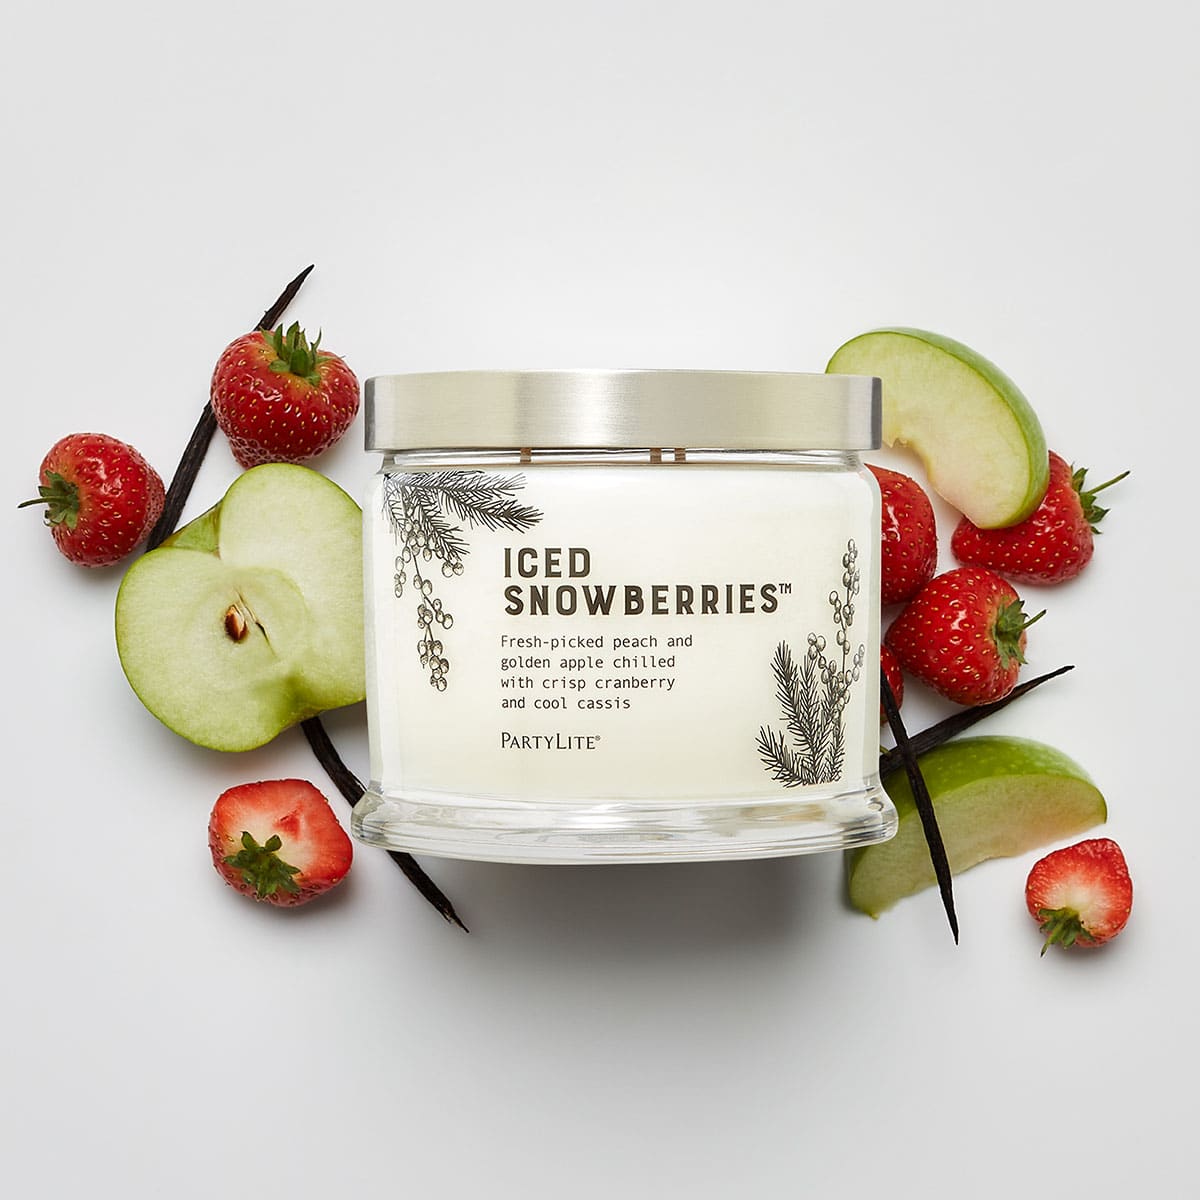 Iced Snowberries 3-Wick Jar Candle